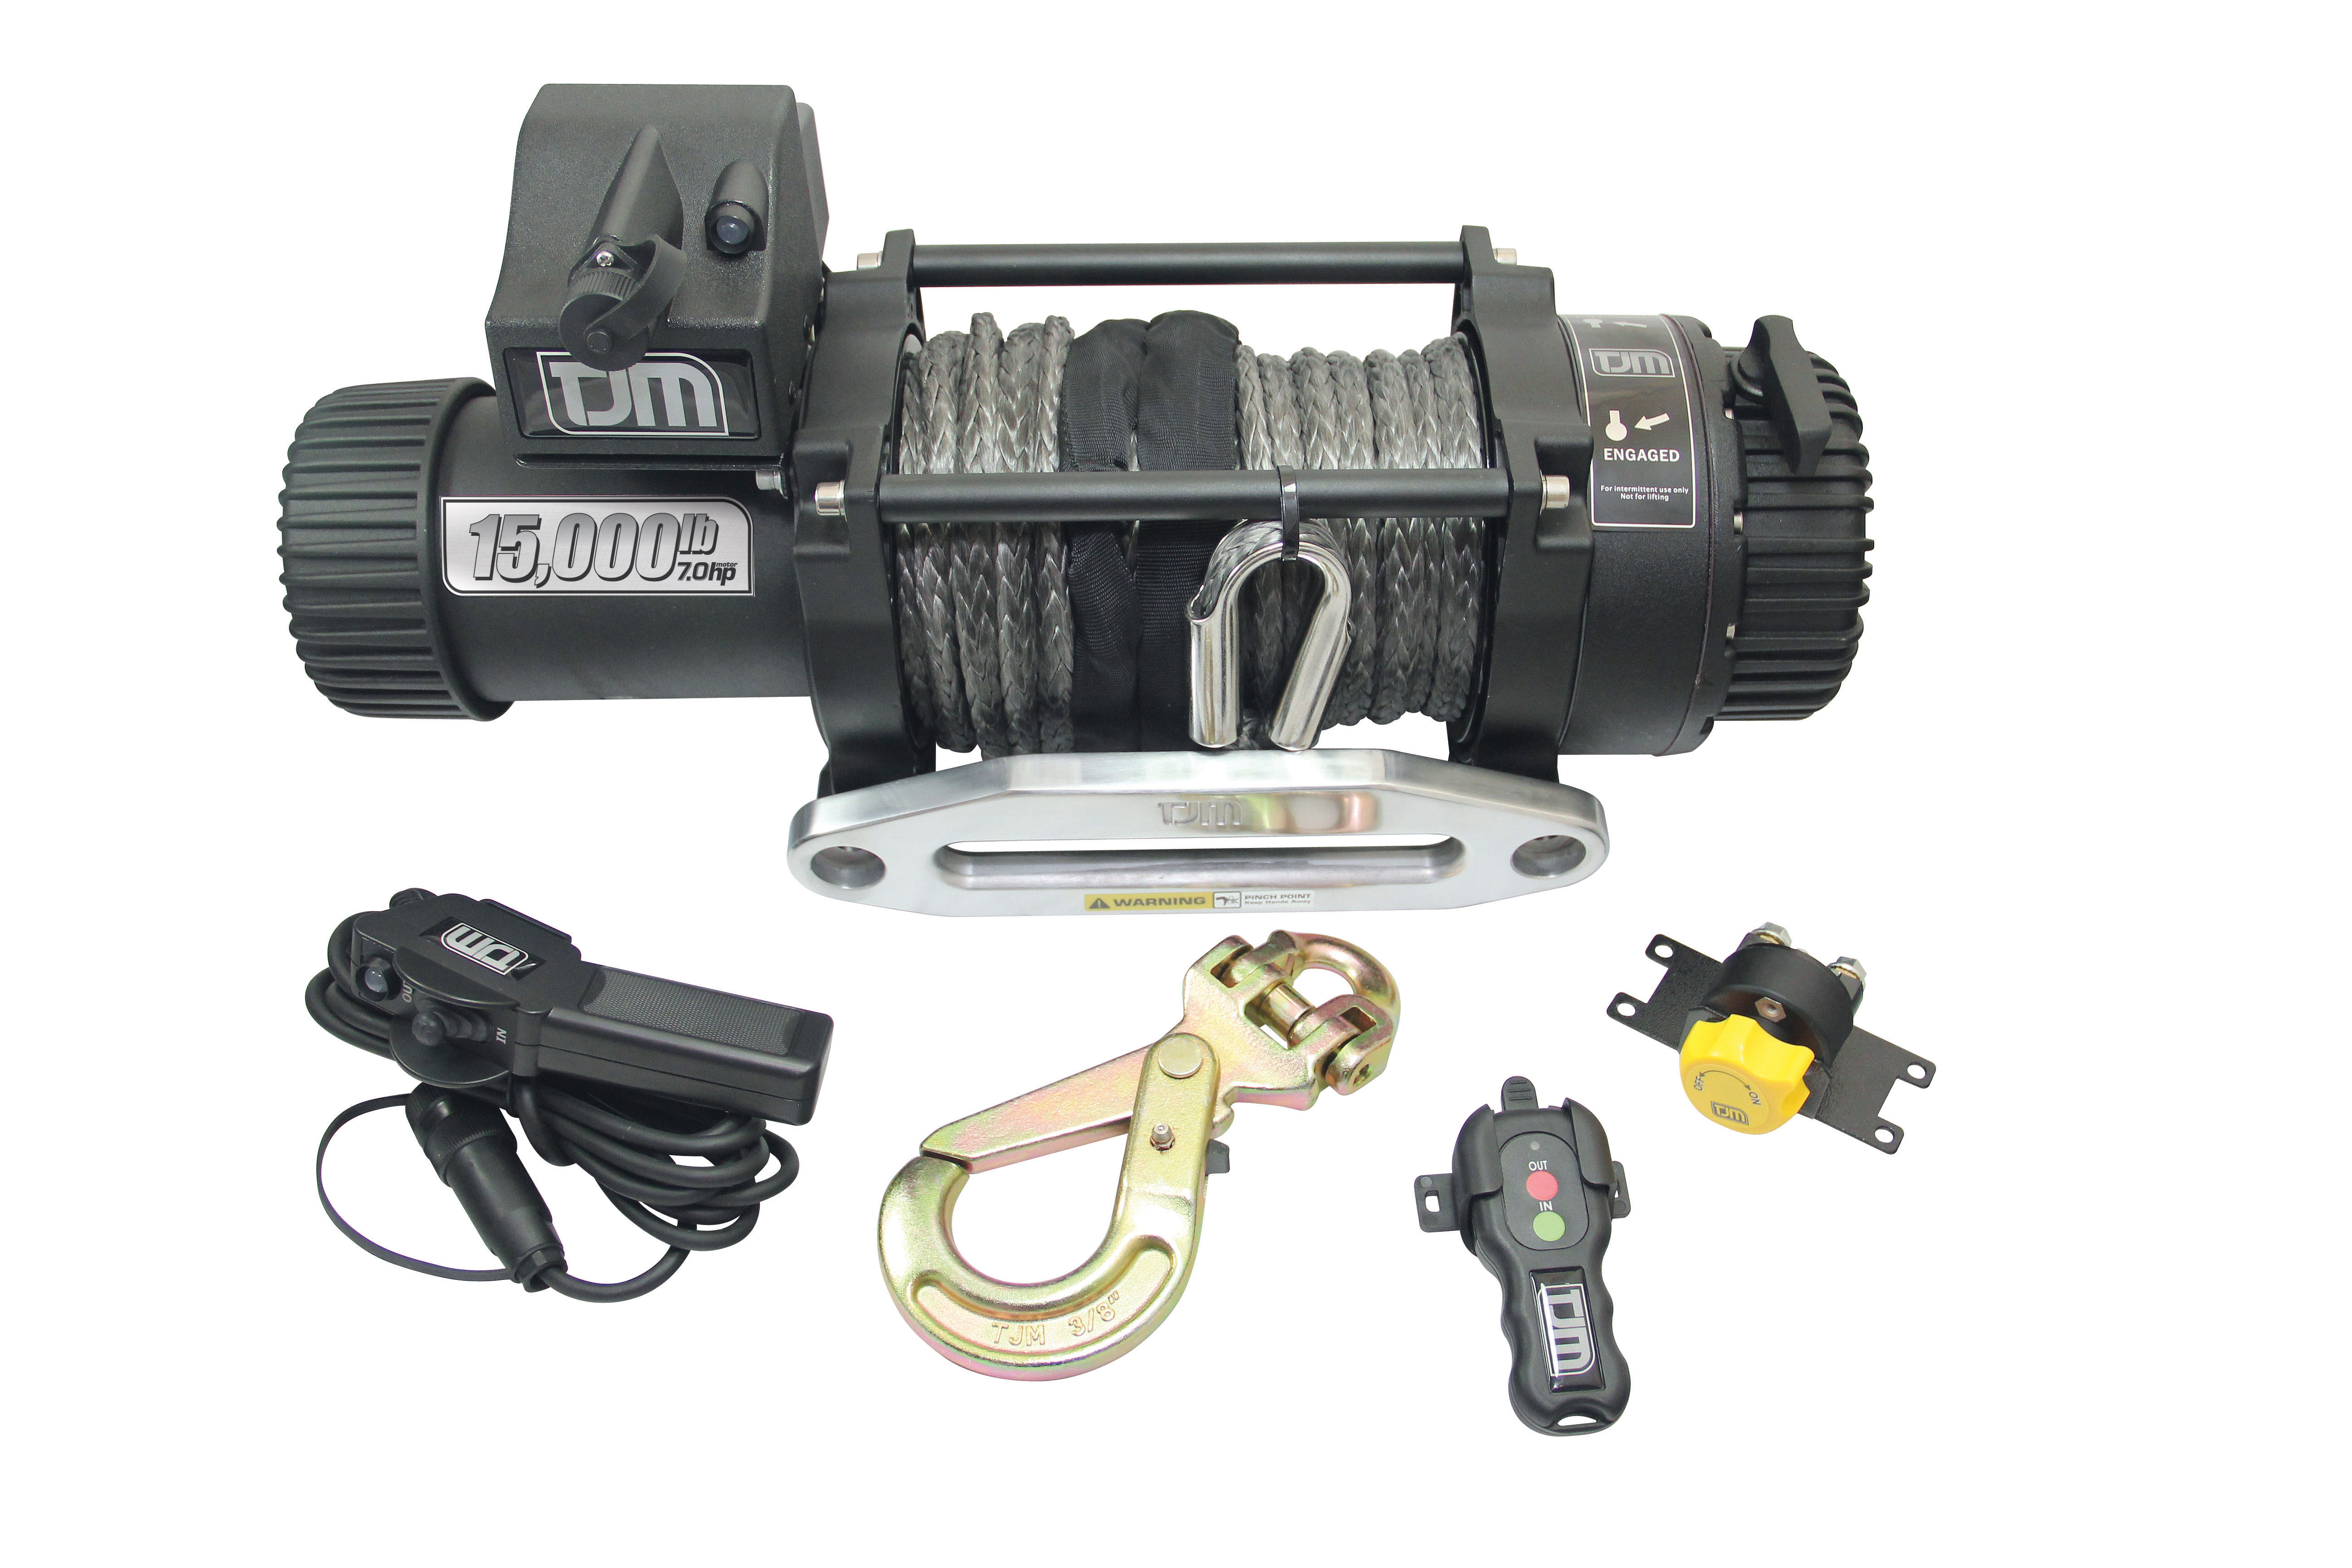 TJM Off-Road Stealth Series Winch, 15,000 Lb. Pull Rate